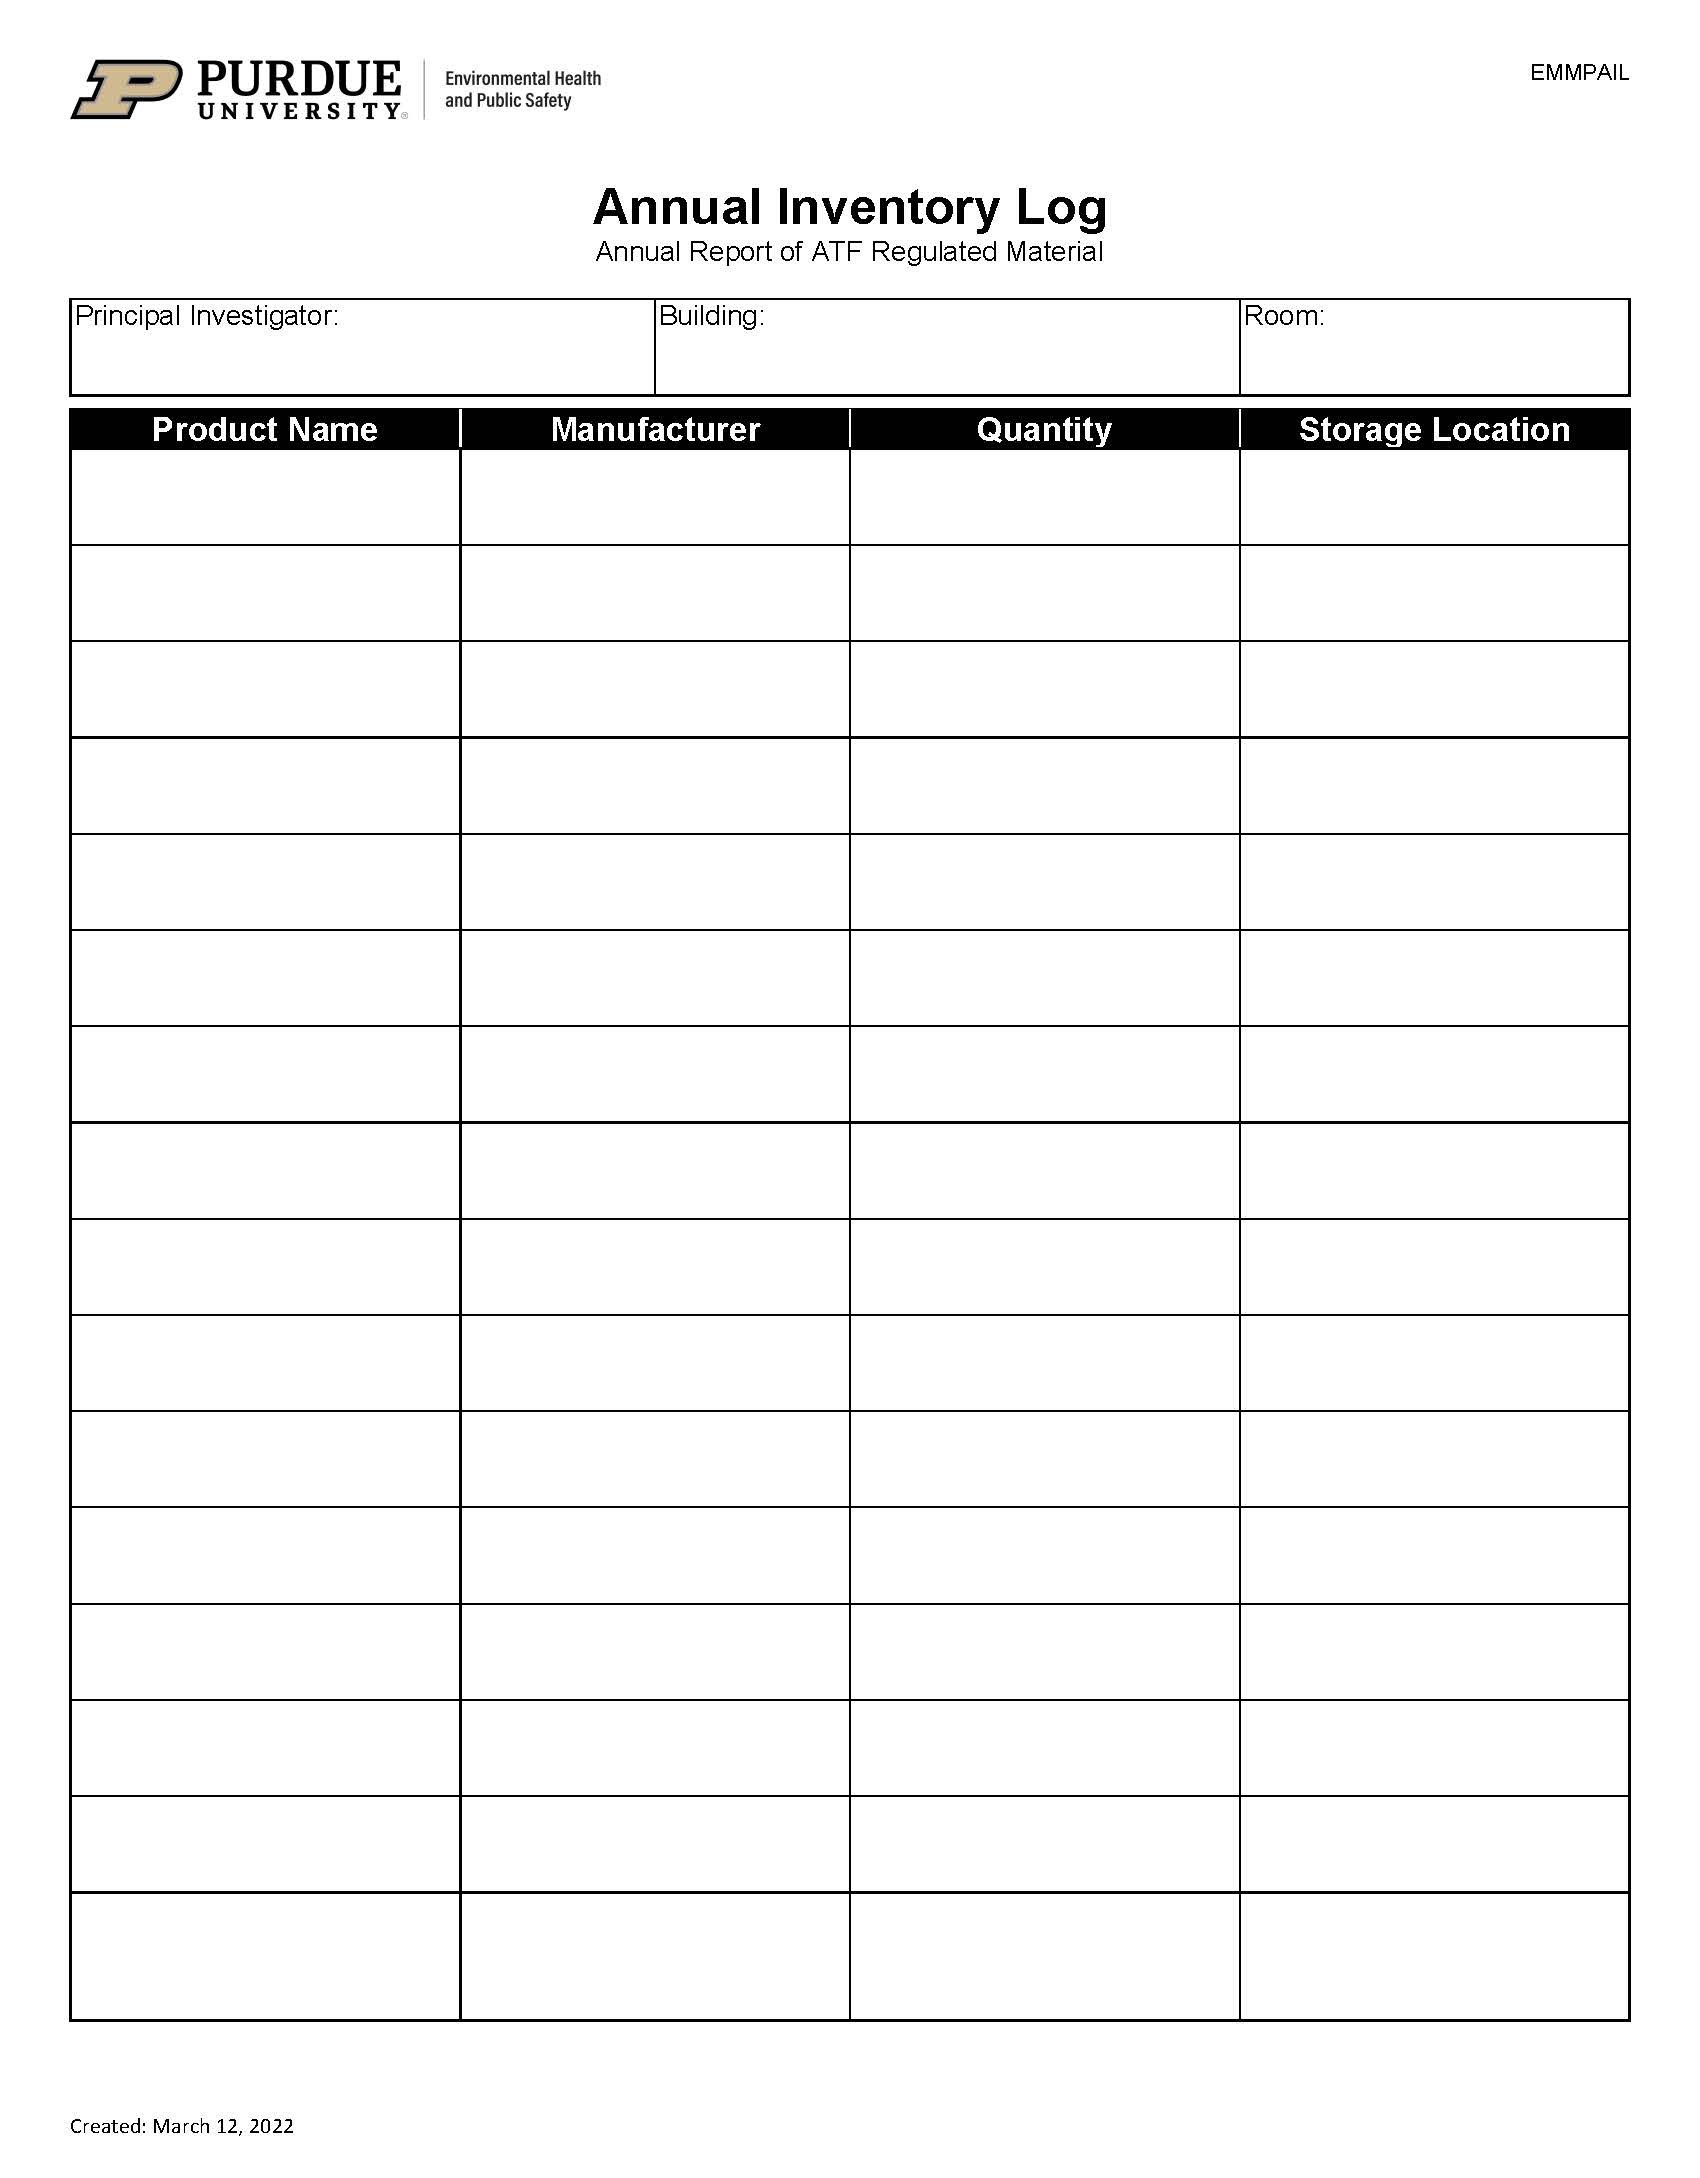 Energetic Materials Management Plan Annual Inventory Log